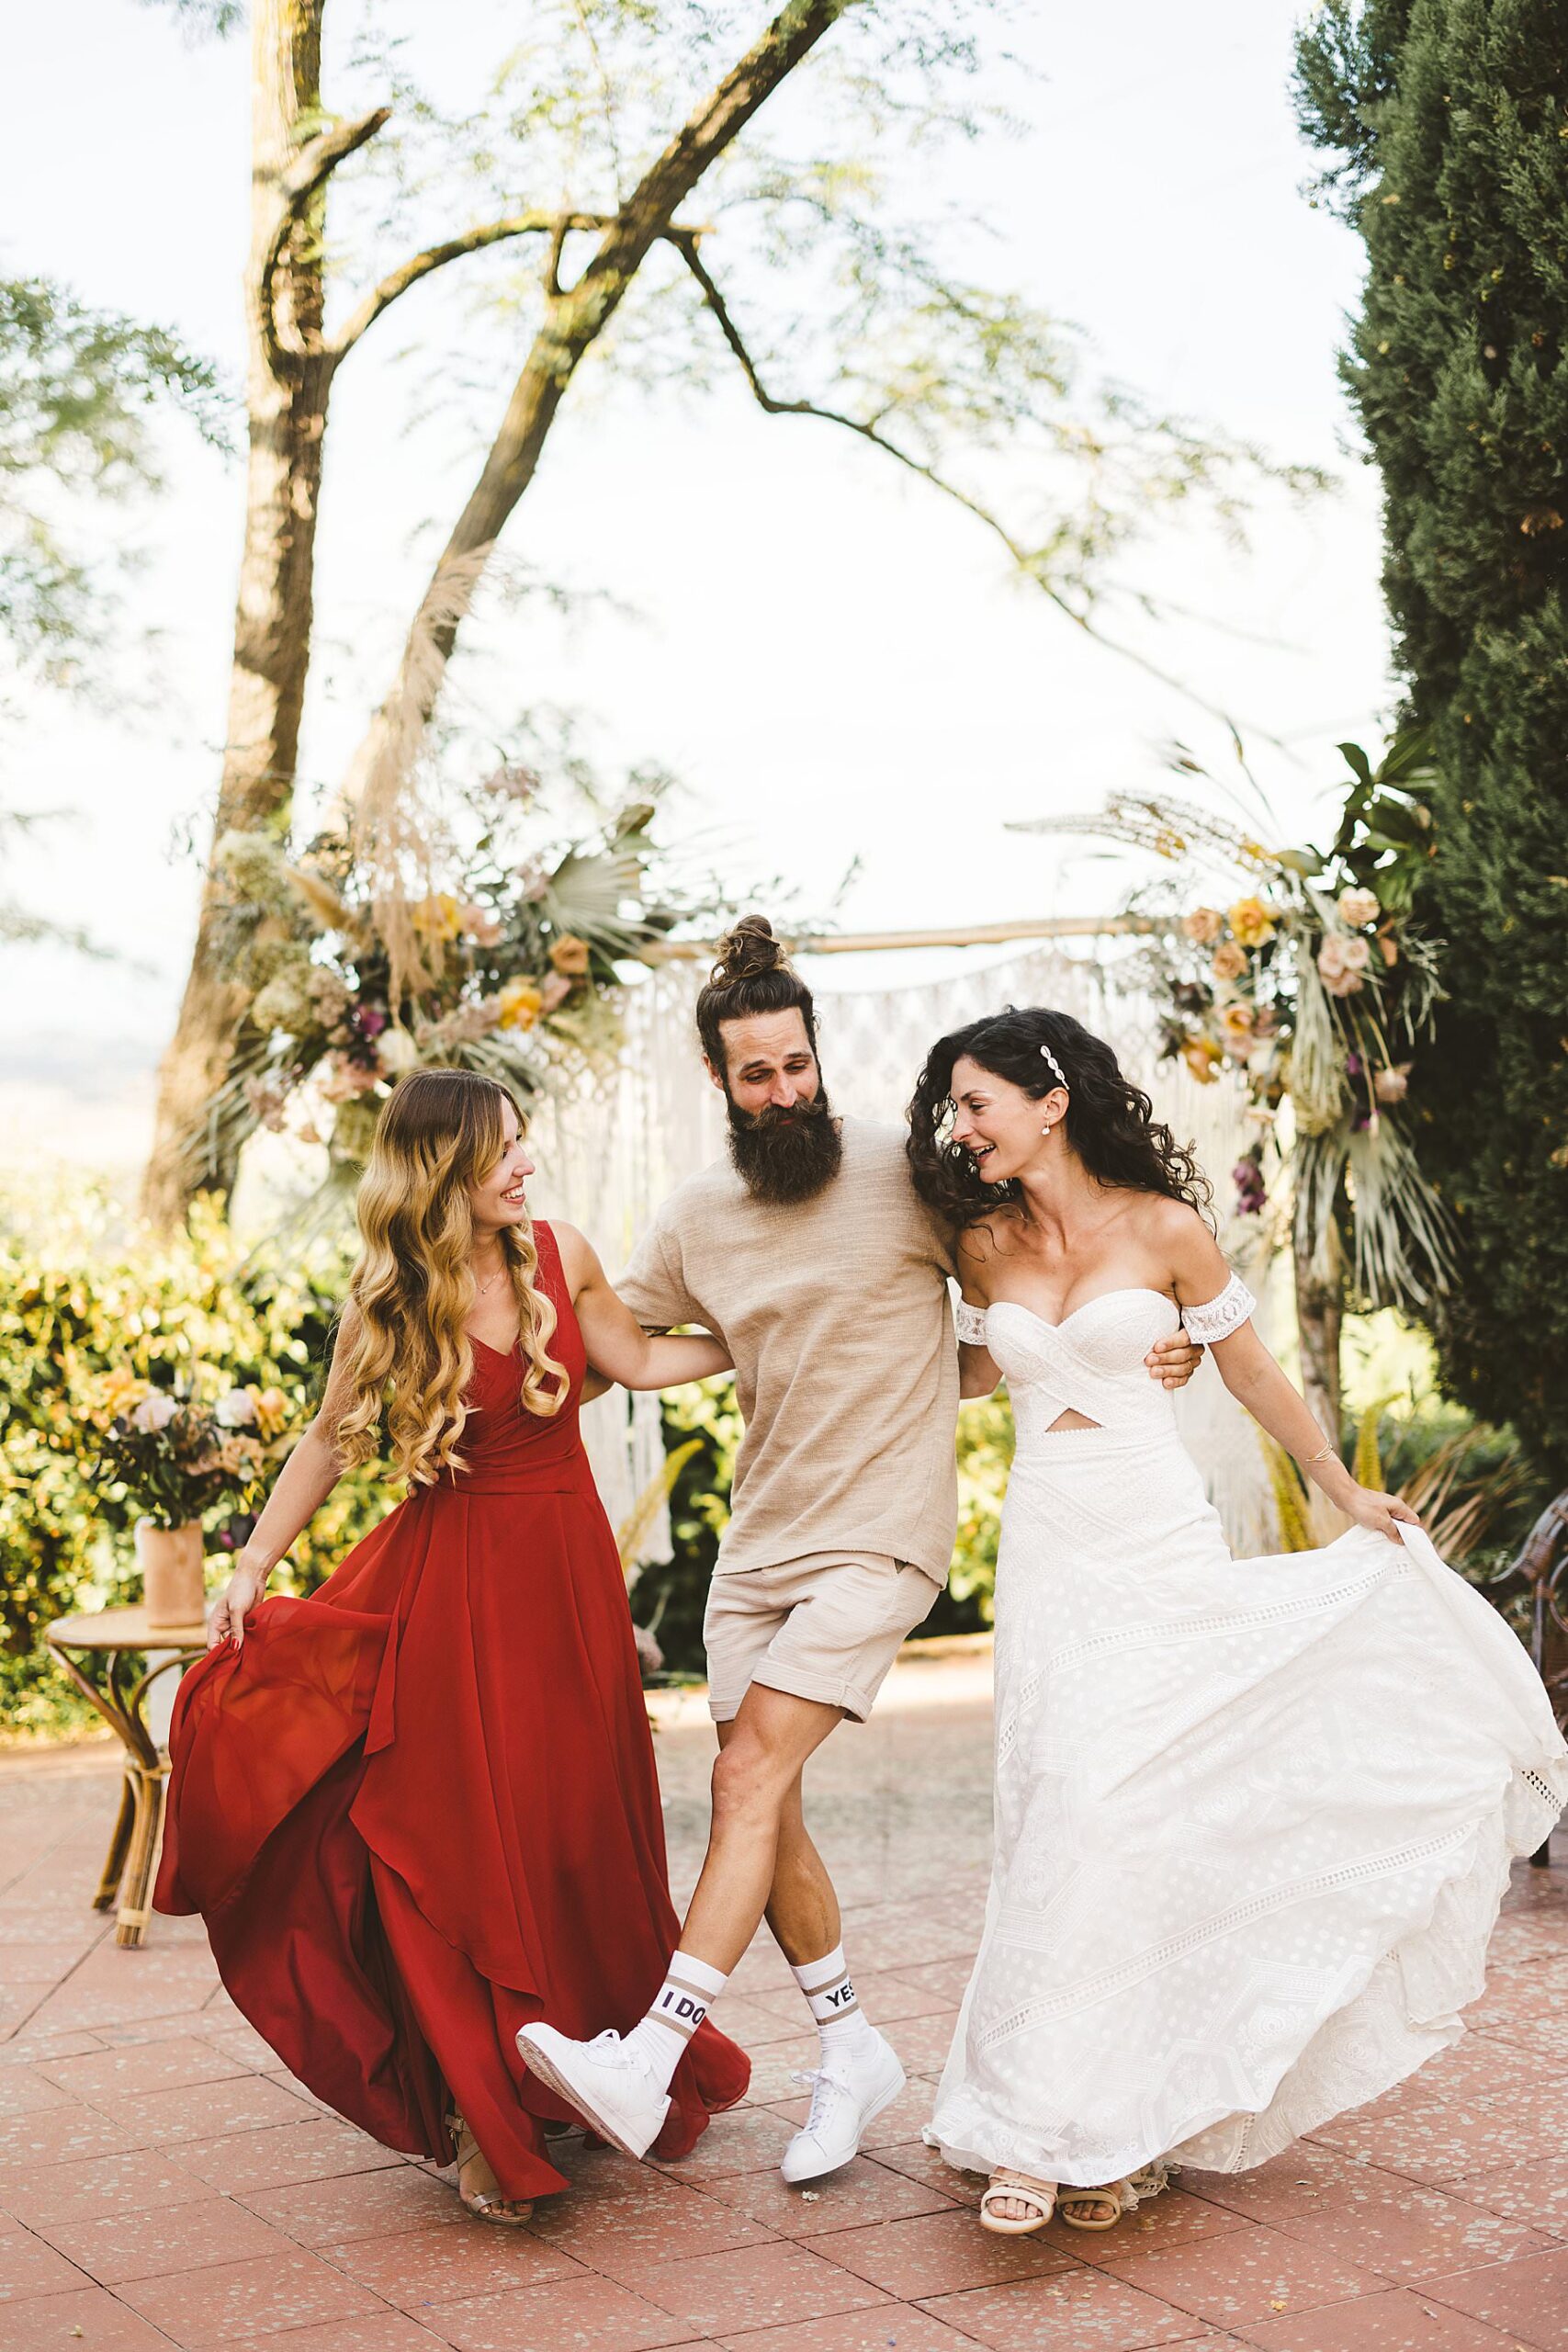 Love and joyful vibes during Italian boho chic intimate destination wedding in Tuscany at La Valle farmhouse near Montaione